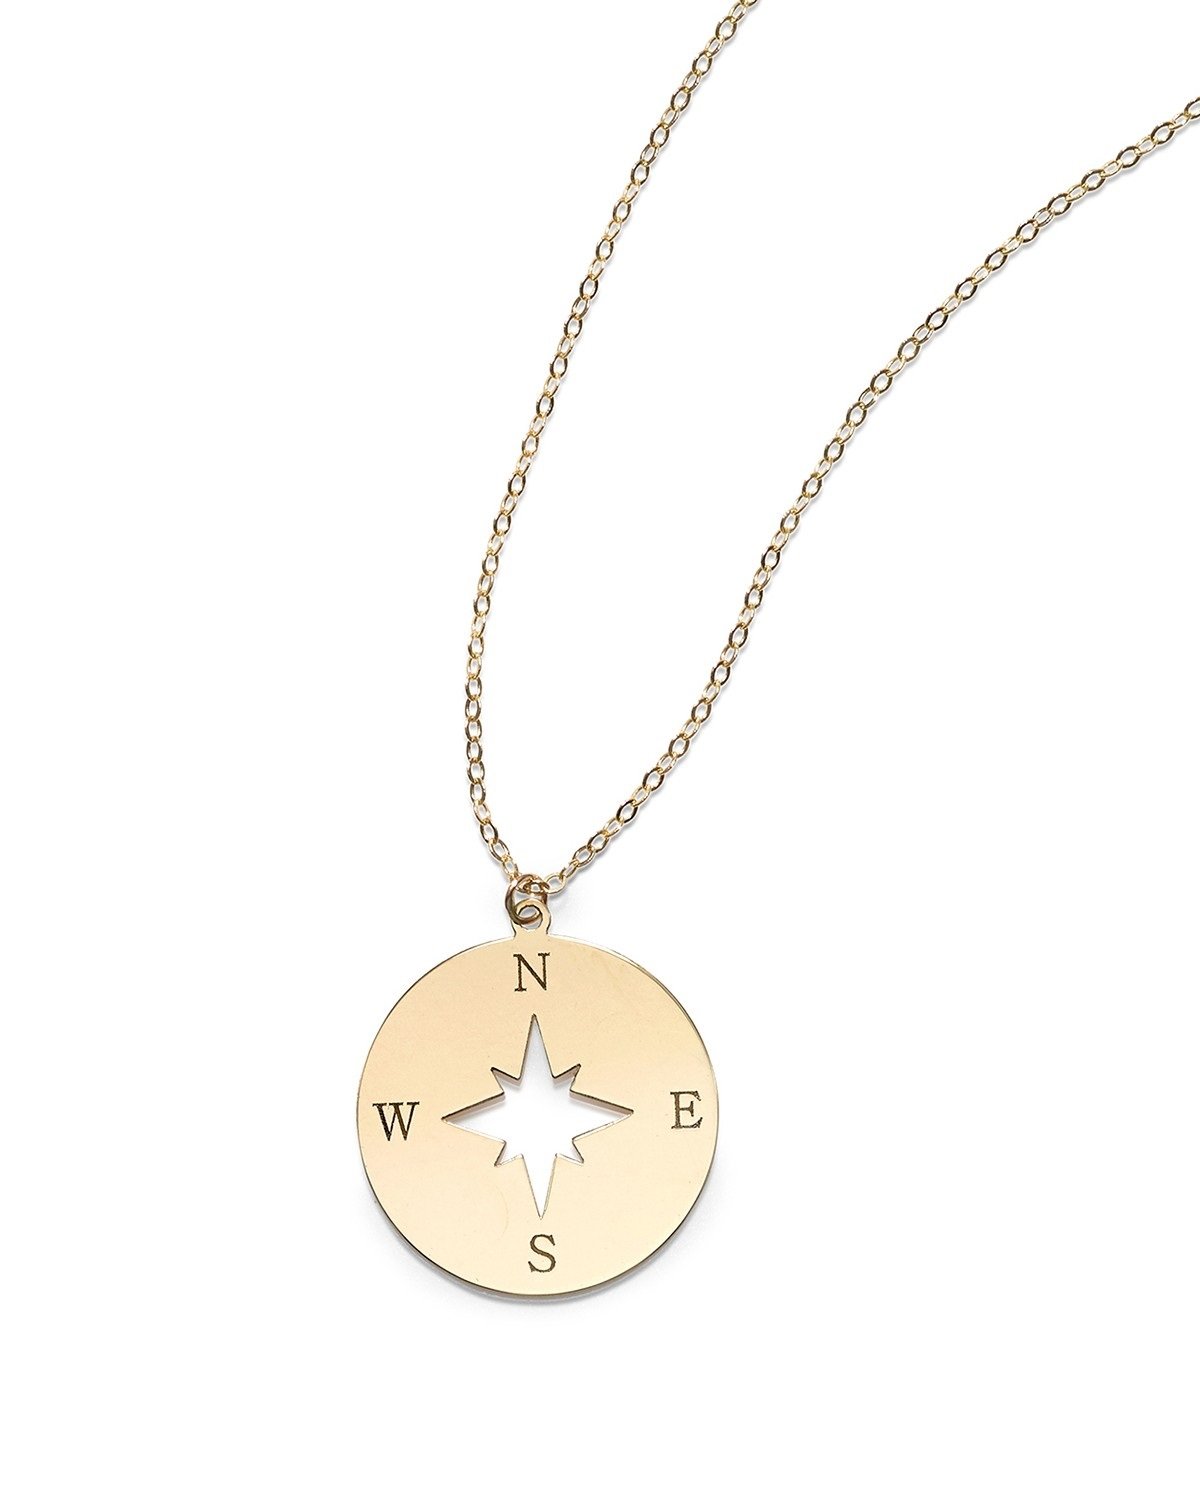 14K Yellow Gold Compass Charm Pendant Necklace